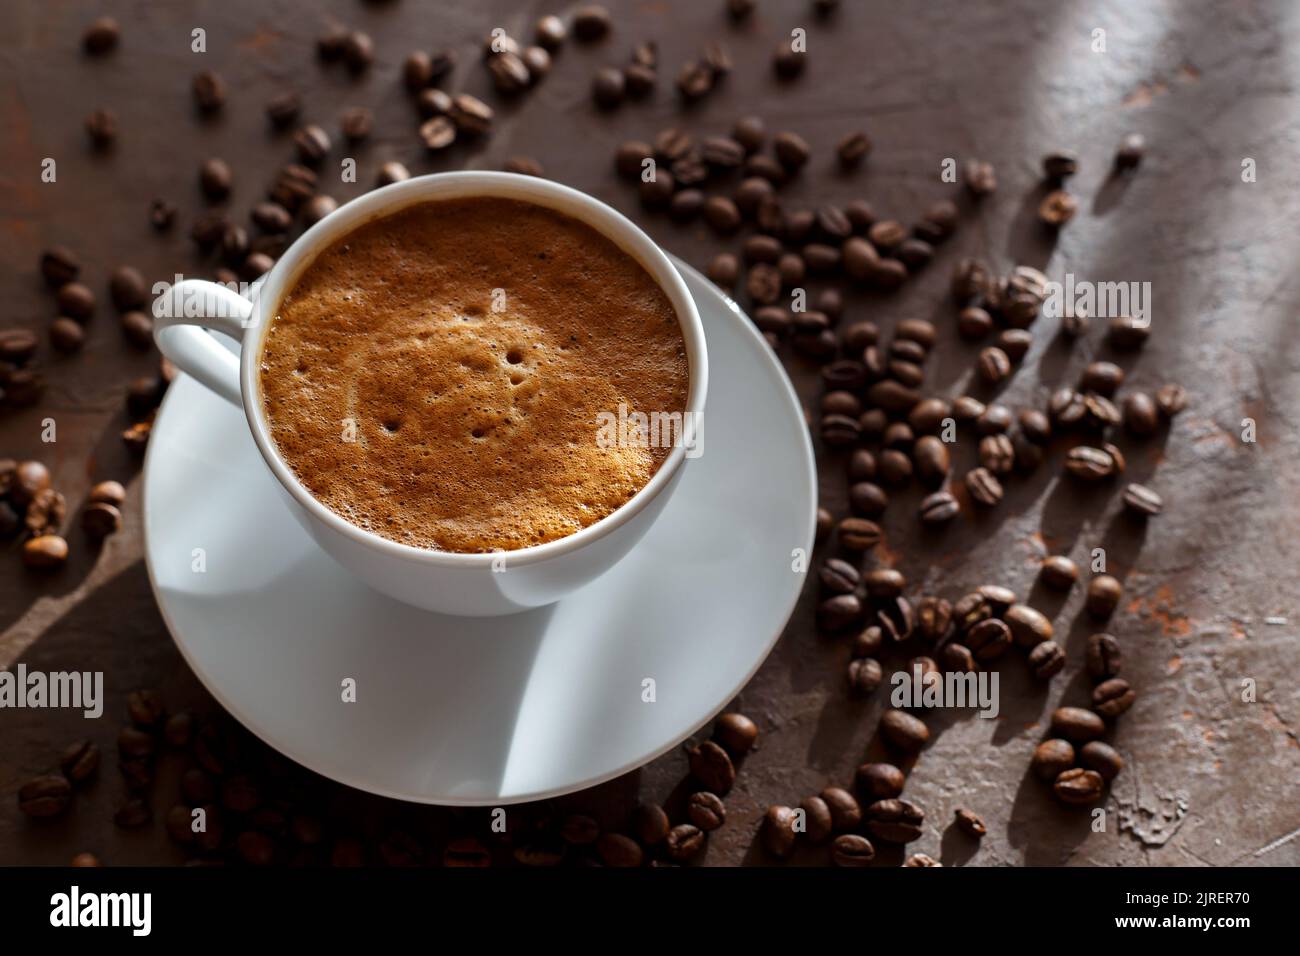 Cup of coffee cappuccino and coffee beans on the brown stone background Stock Photo